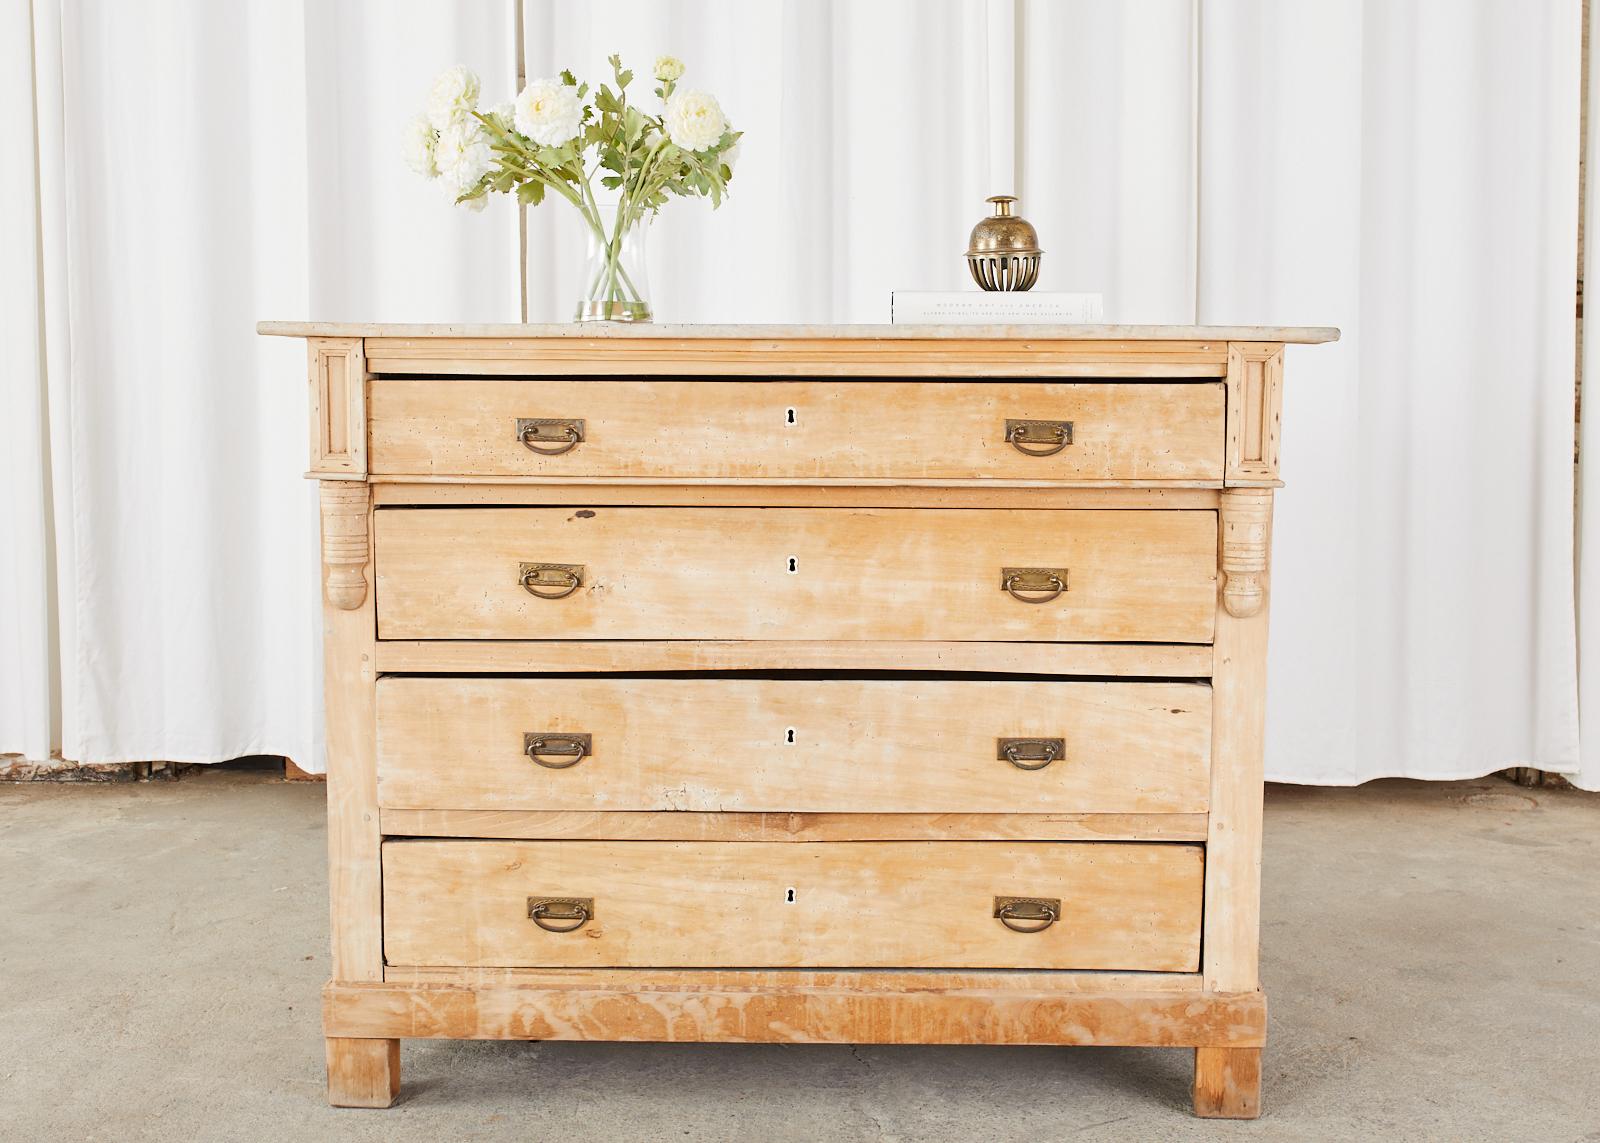 Rustic 19th century Swedish pine commode or chest of drawers featuring a bleached finish. The large chest has four generous wide storage drawers with brass pulls. The case has a beautifully aged patina on the washed pine. Solid and stable